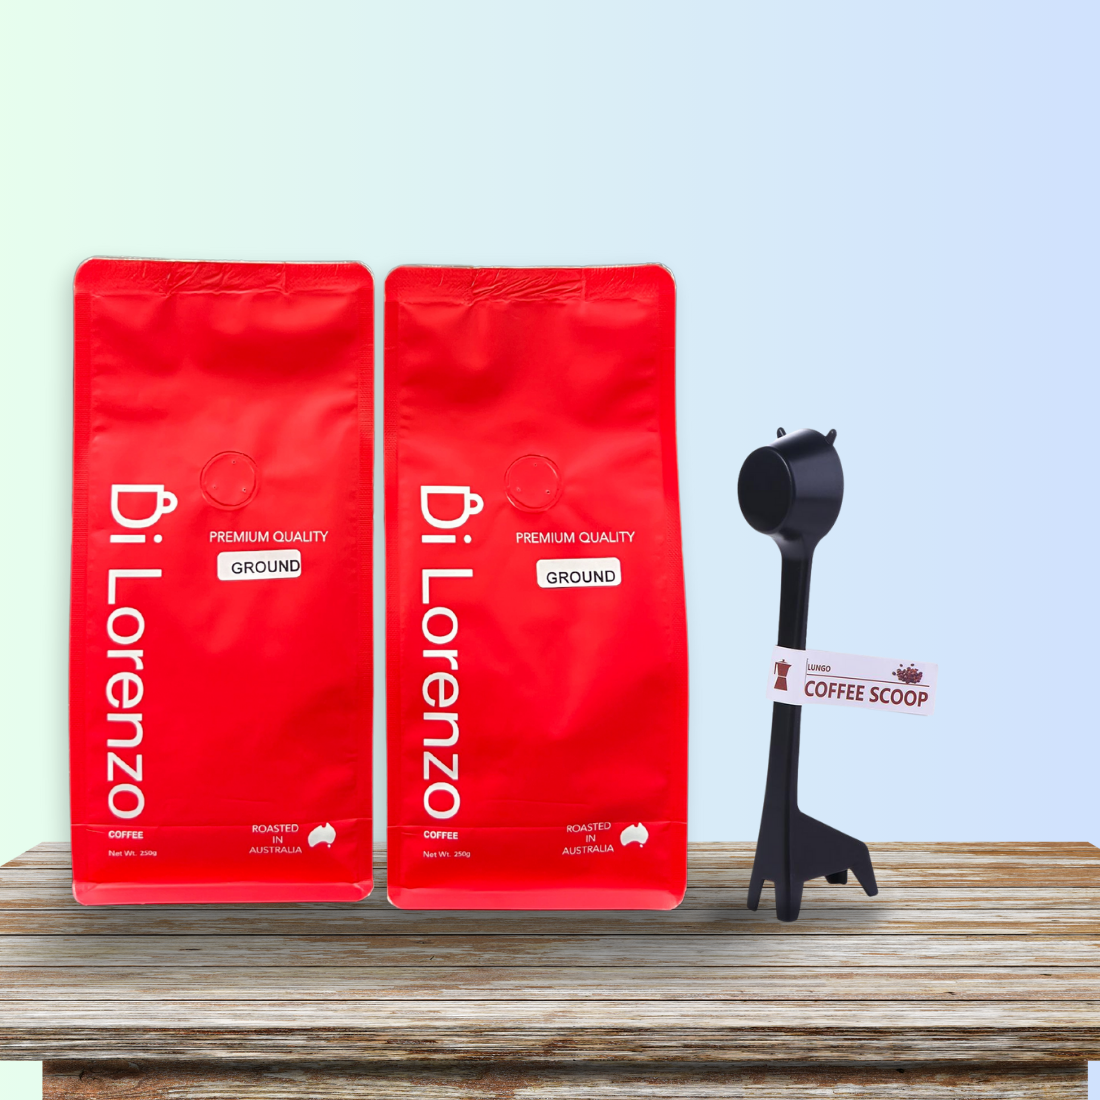 Two red bags of Di Lorenzo ground coffee on a wooden table, accompanied by a whimsical giraffe-shaped standing coffee scoop with a label, set against a serene blue gradient background.